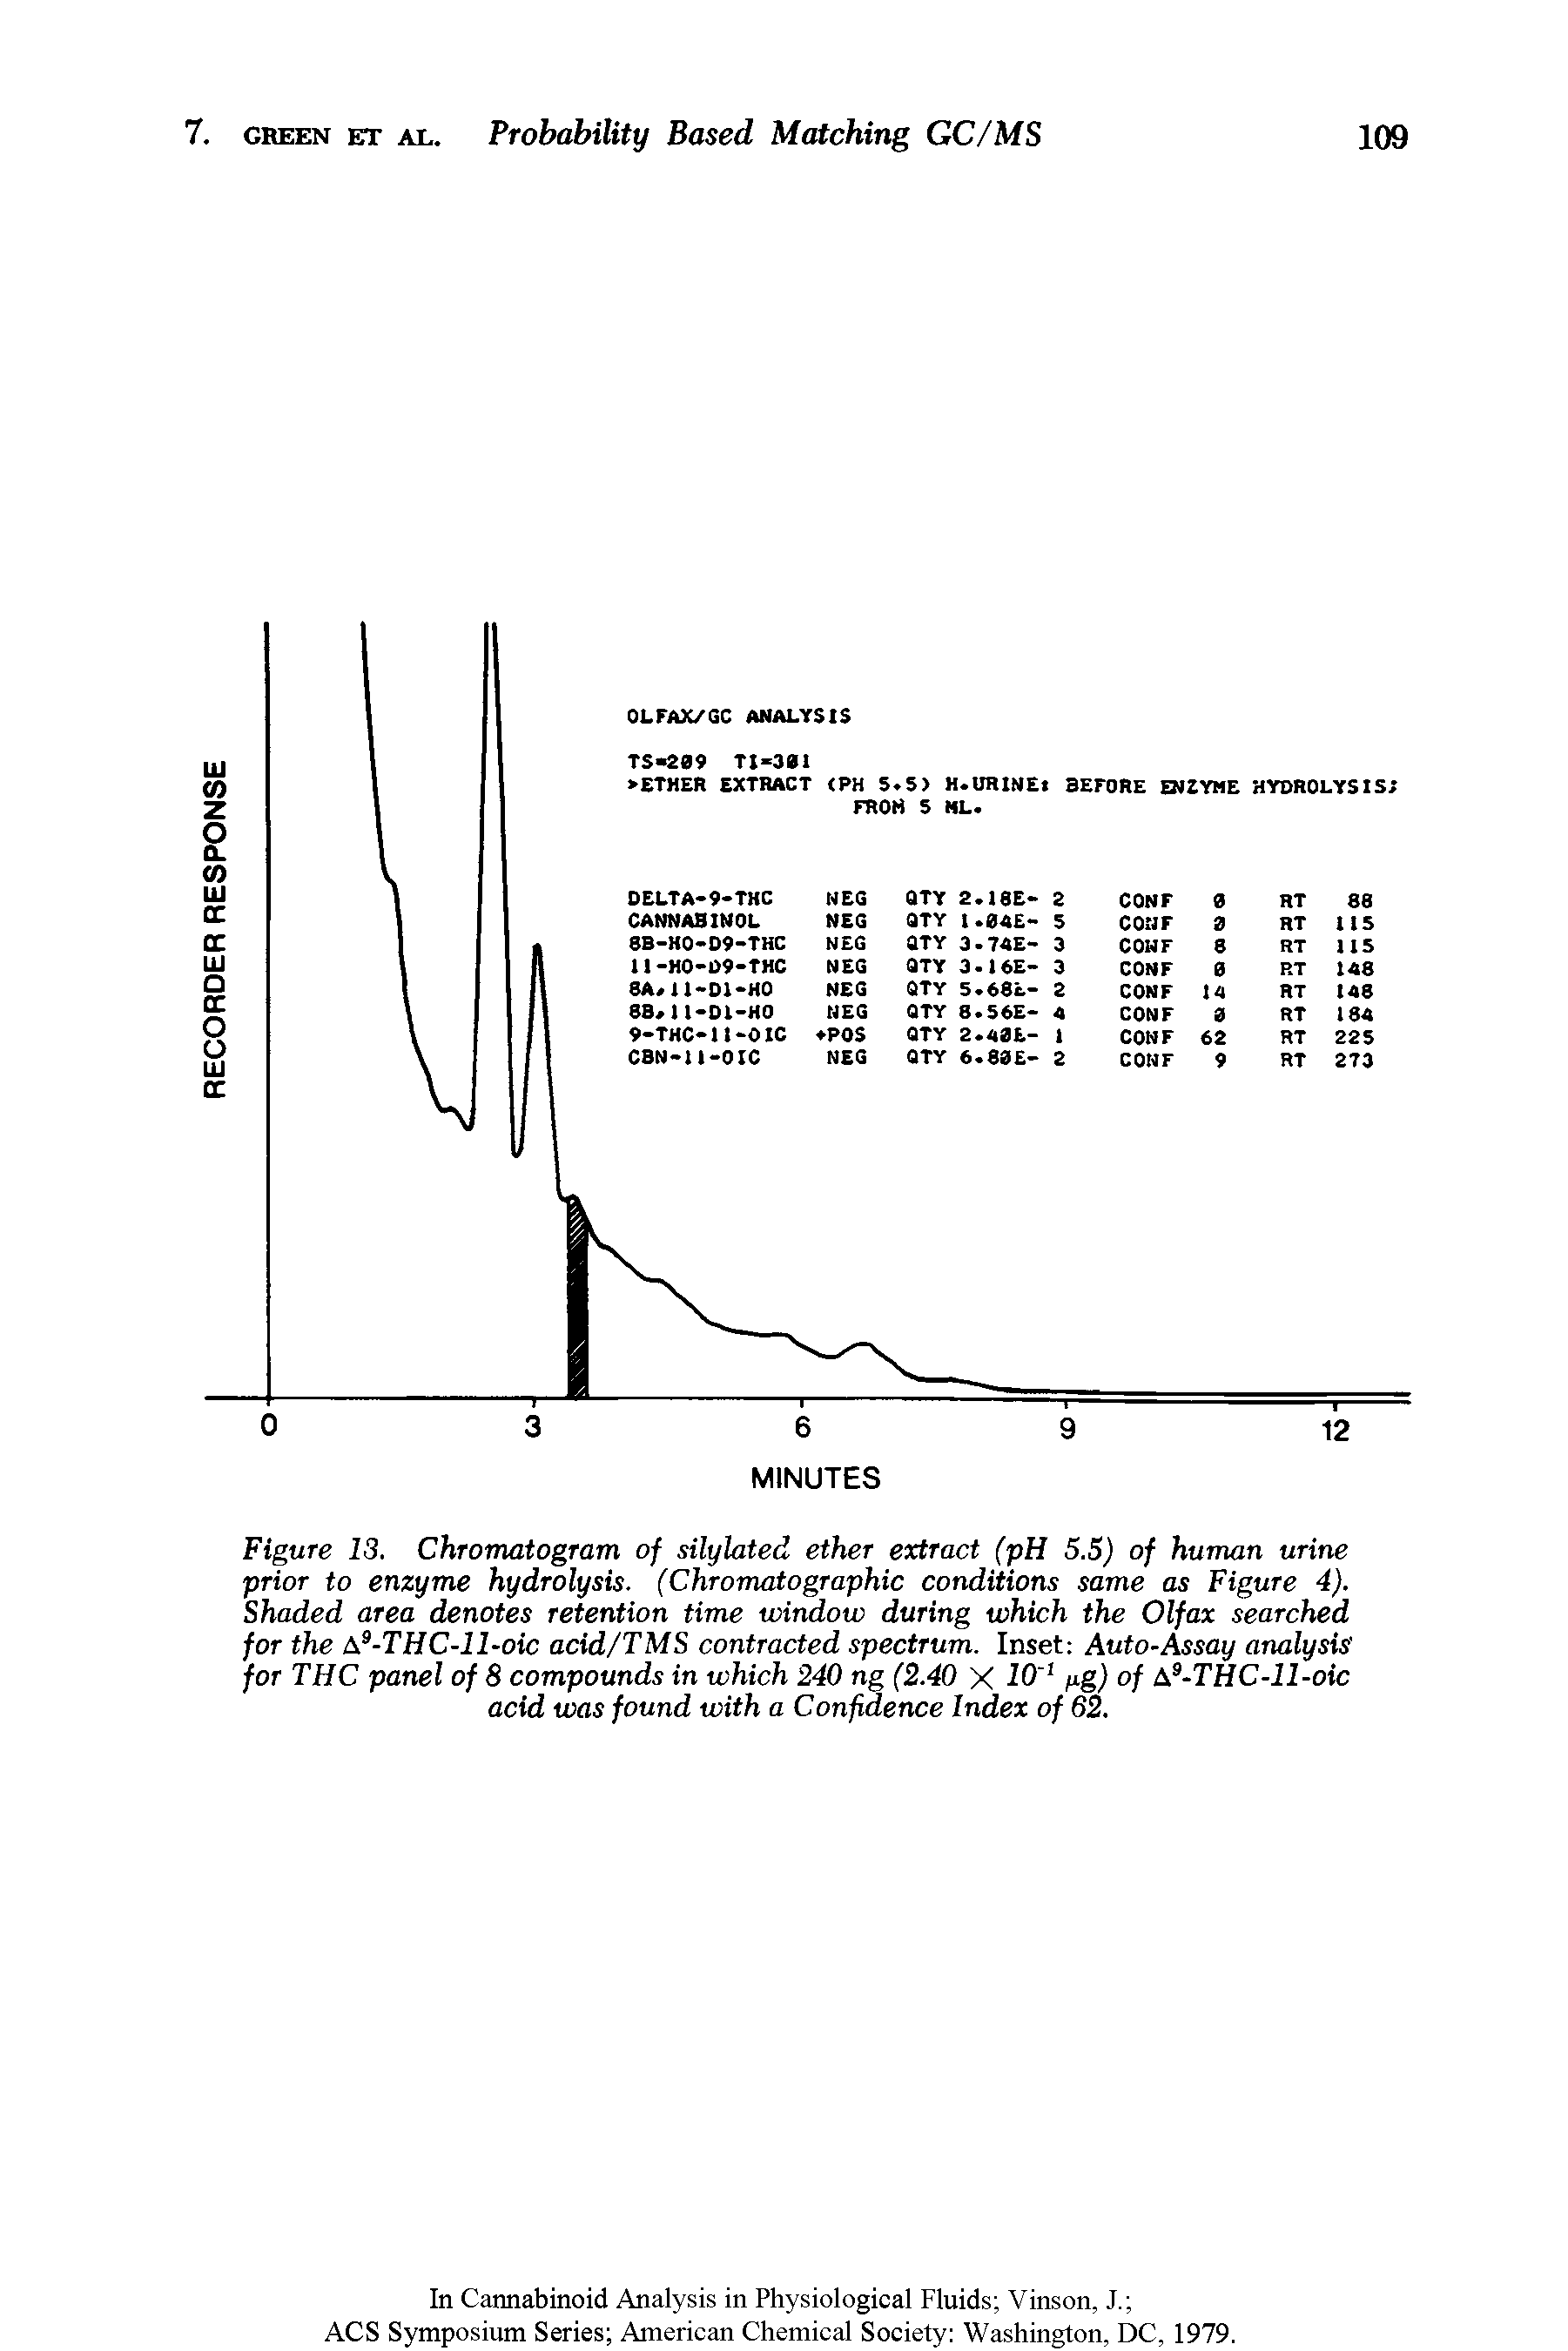 Figure 13. Chromatogram of silylated ether extract (pH 5.5) of human urine prior to enzyme hydrolysis. (Chromatographic conditions same as Figure 4). Shaded area denotes retention time window during which the Olfax searched for the 9-THC-ll-oic acid/TMS contracted spectrum. Inset Auto-Assay analysis for THC panel of 8 compounds in which 240 ng (2.40 X 10 1 fig) of A9-THC-ll-oic acid was found with a Confidence Index of 62.